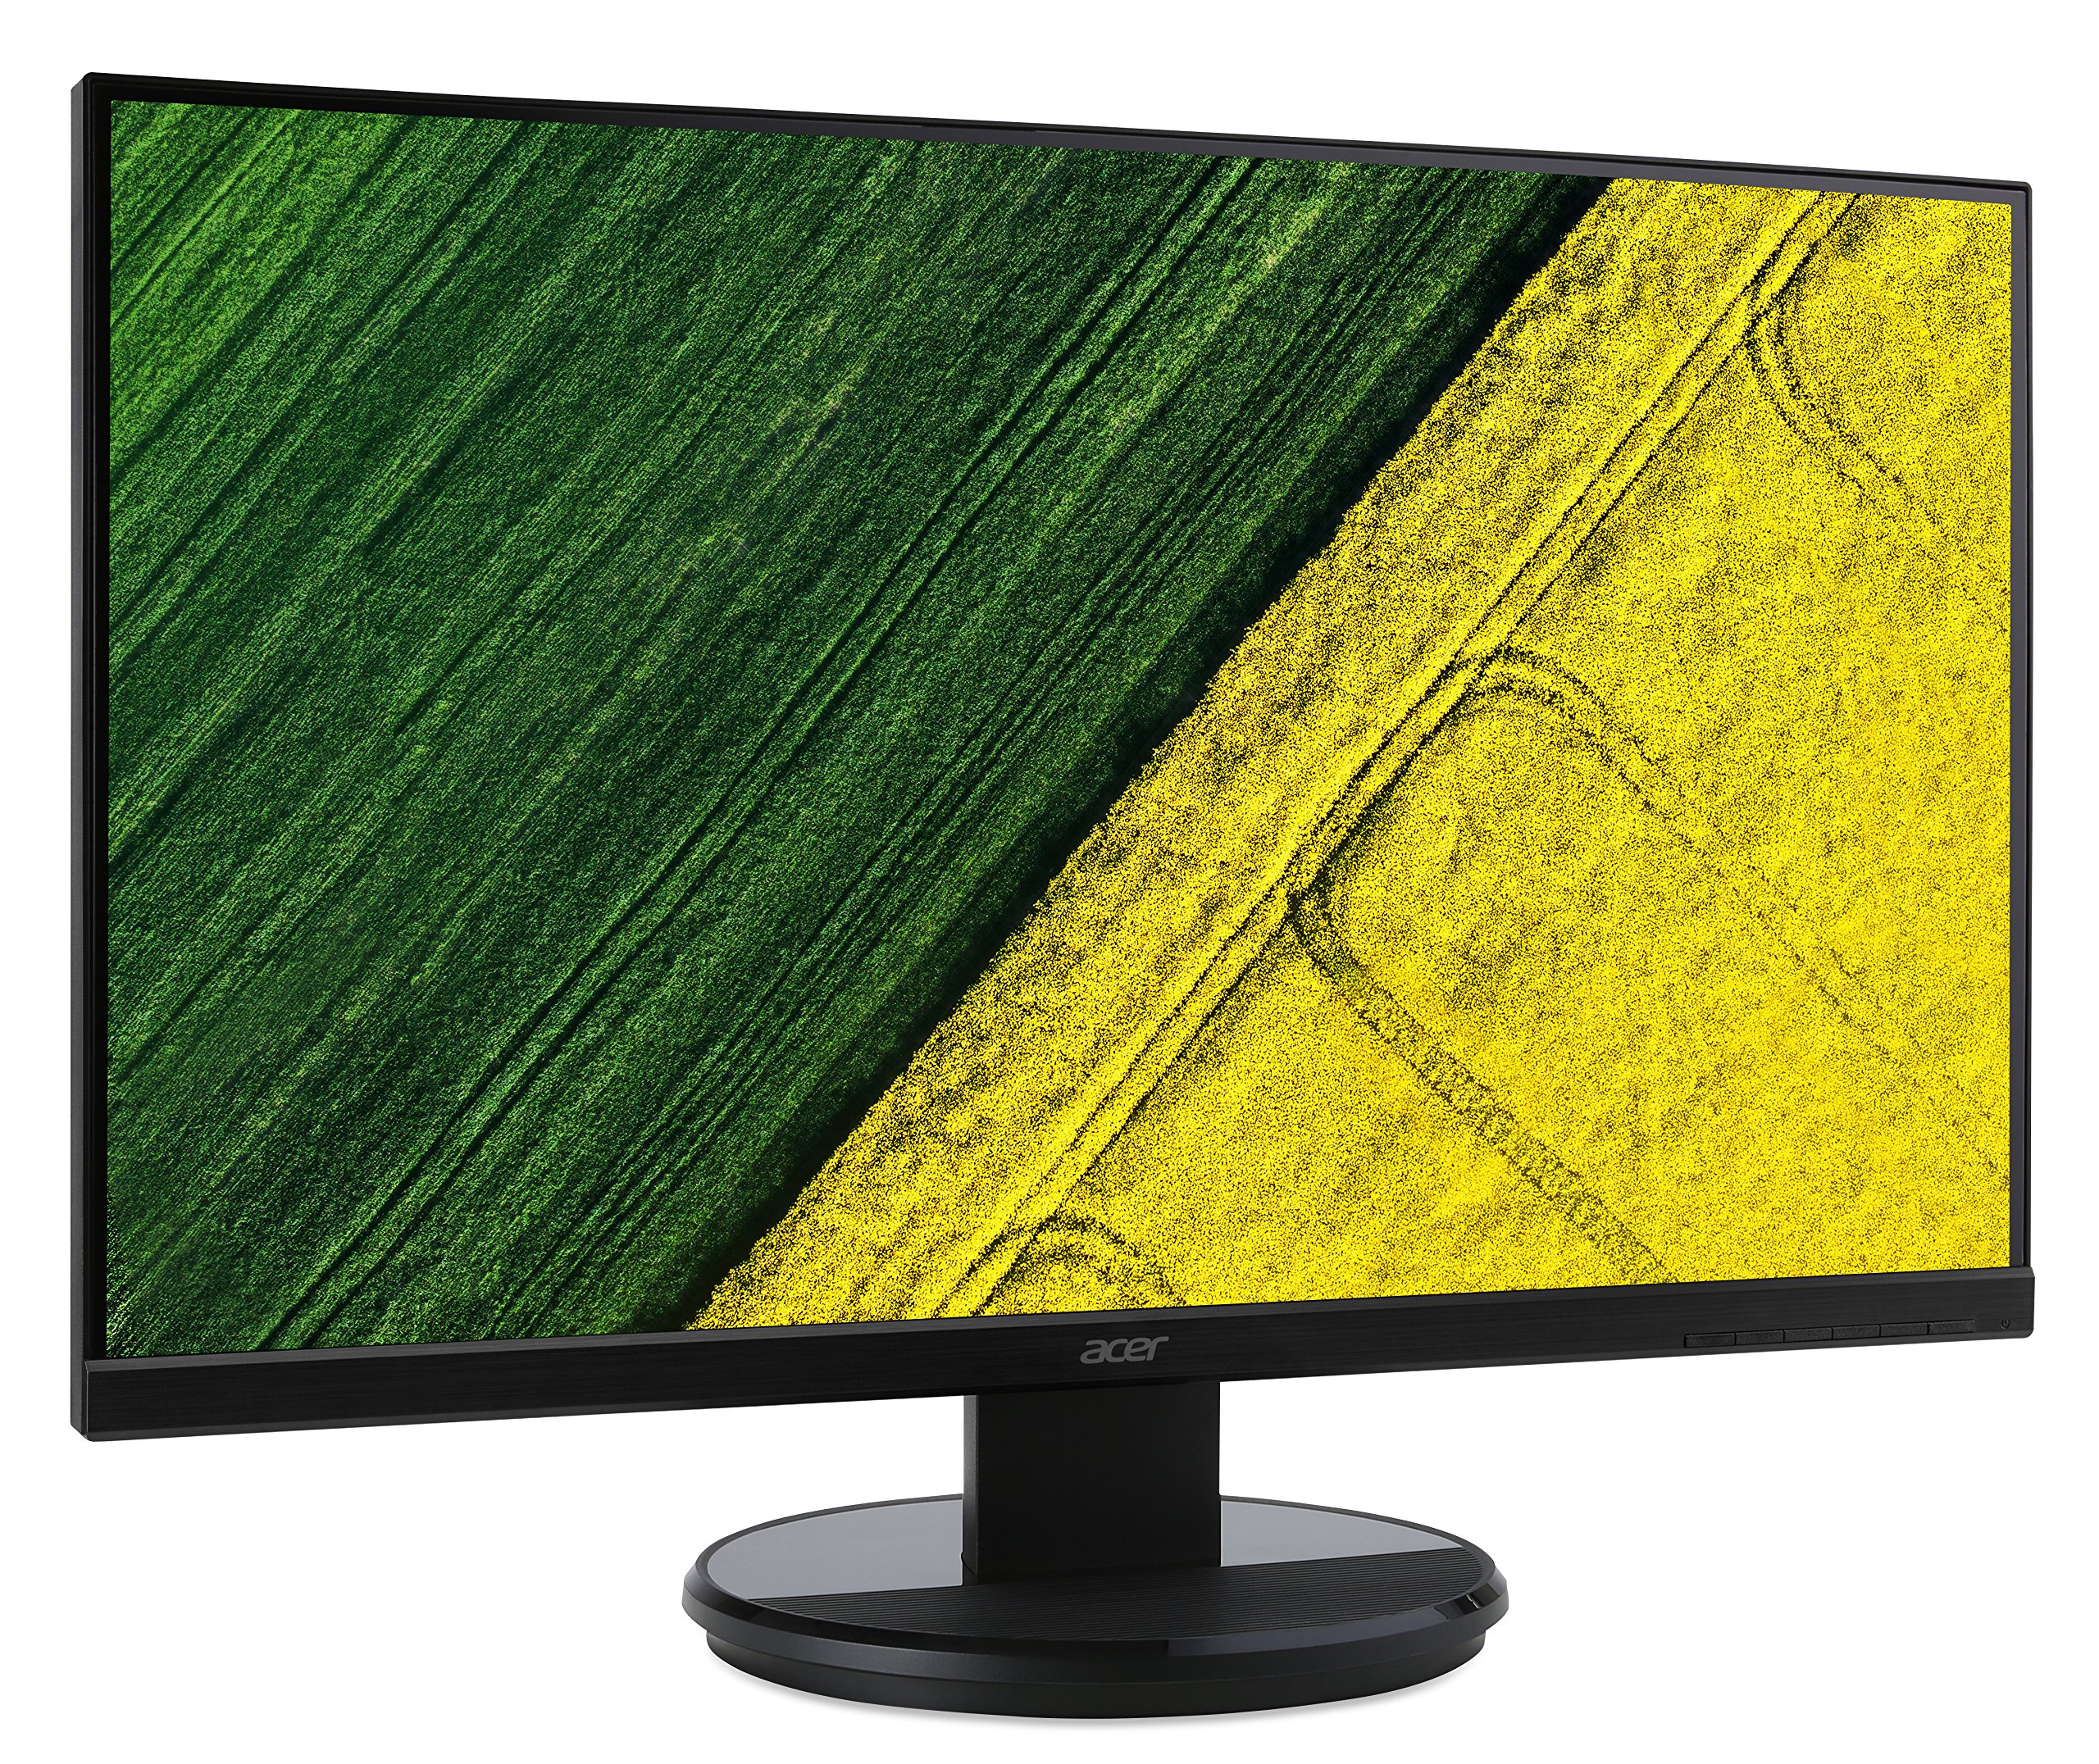 Monitores ACER gallery